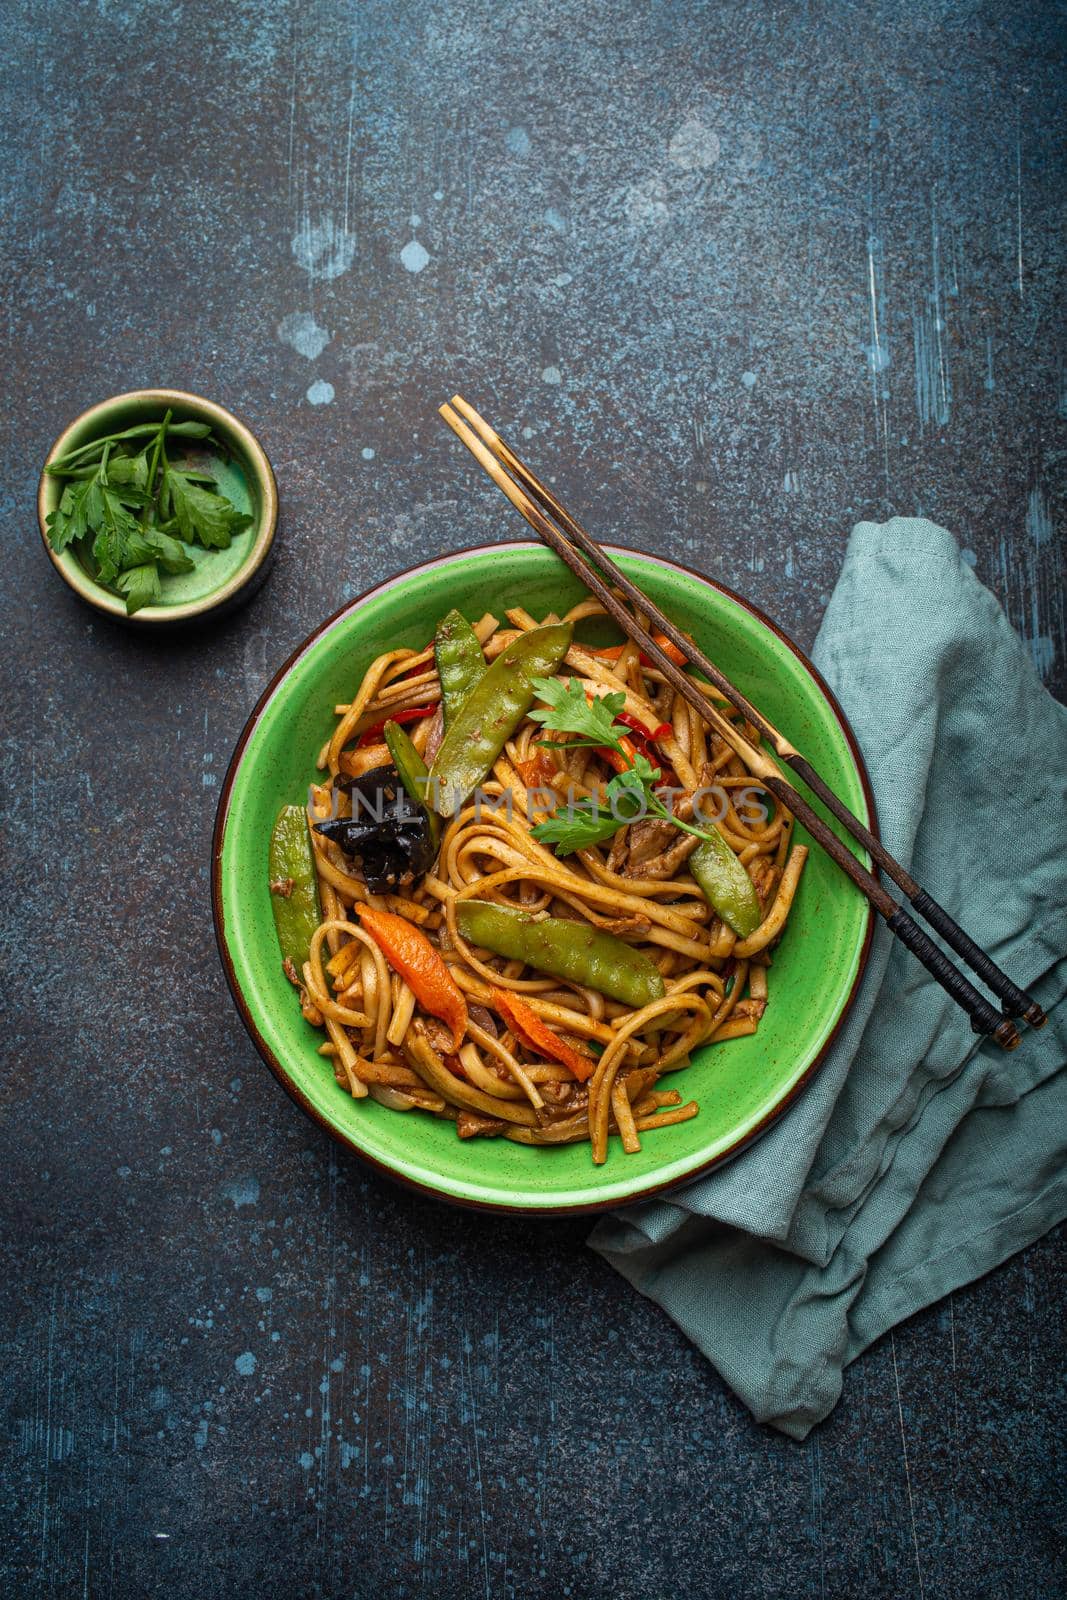 Asian dish stir fry udon noodles with chicken, vegetables and mushrooms in green ceramic bowl with wooden chopsticks on rustic dark blue concrete background from above, Chinese or Thai fast food